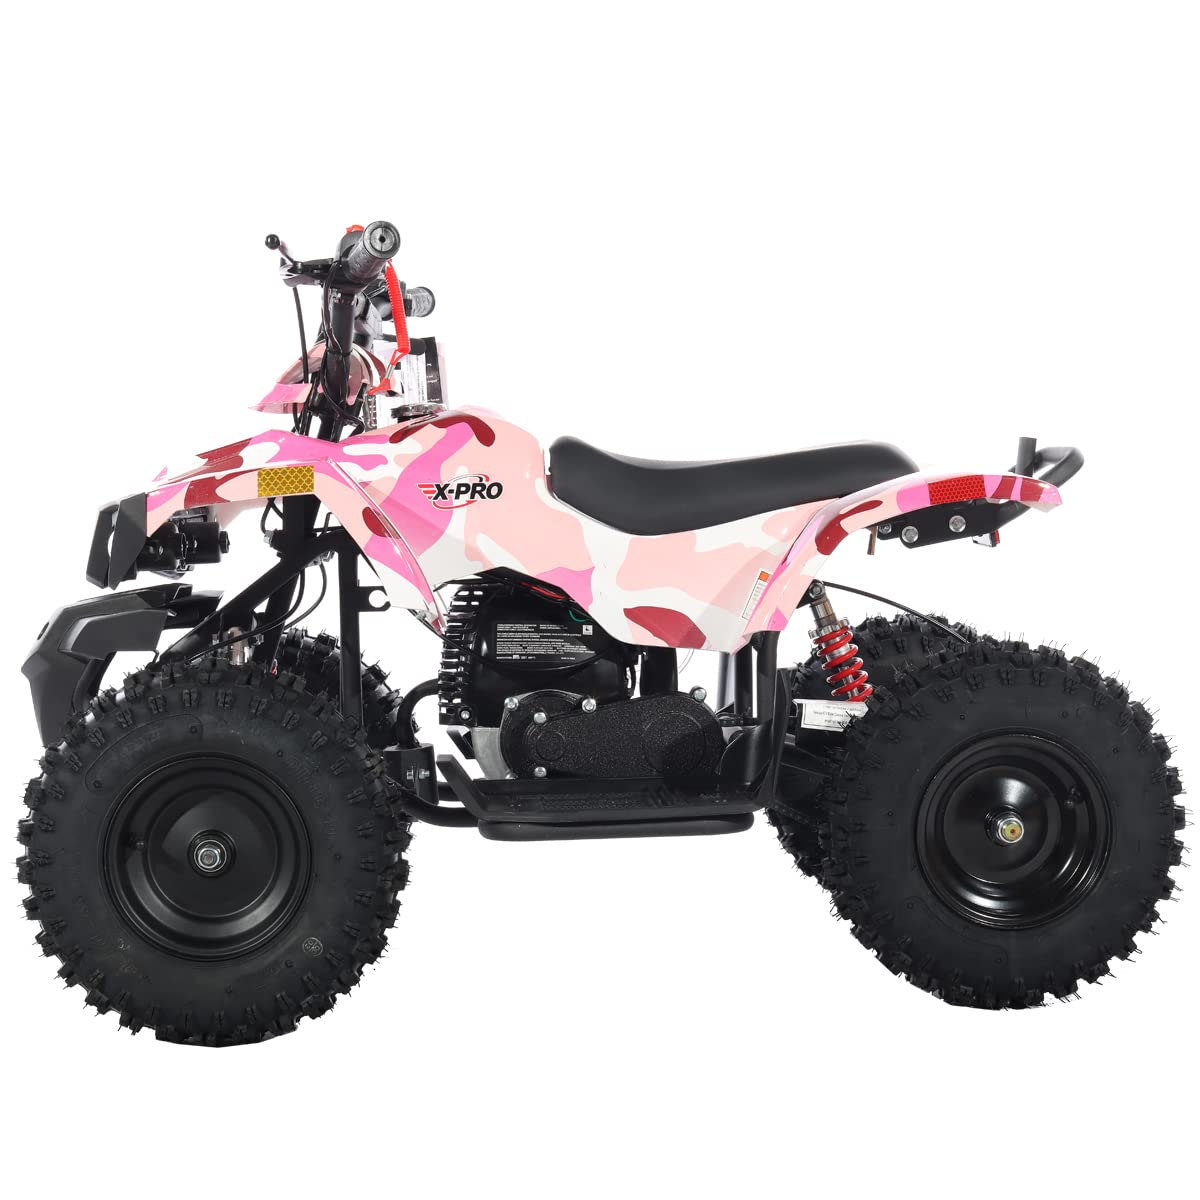 X-PRO Bolt 40cc ATV with Chain Transmission, Pull Start! Disc Brake! 6" Tires! (Pink Camo)